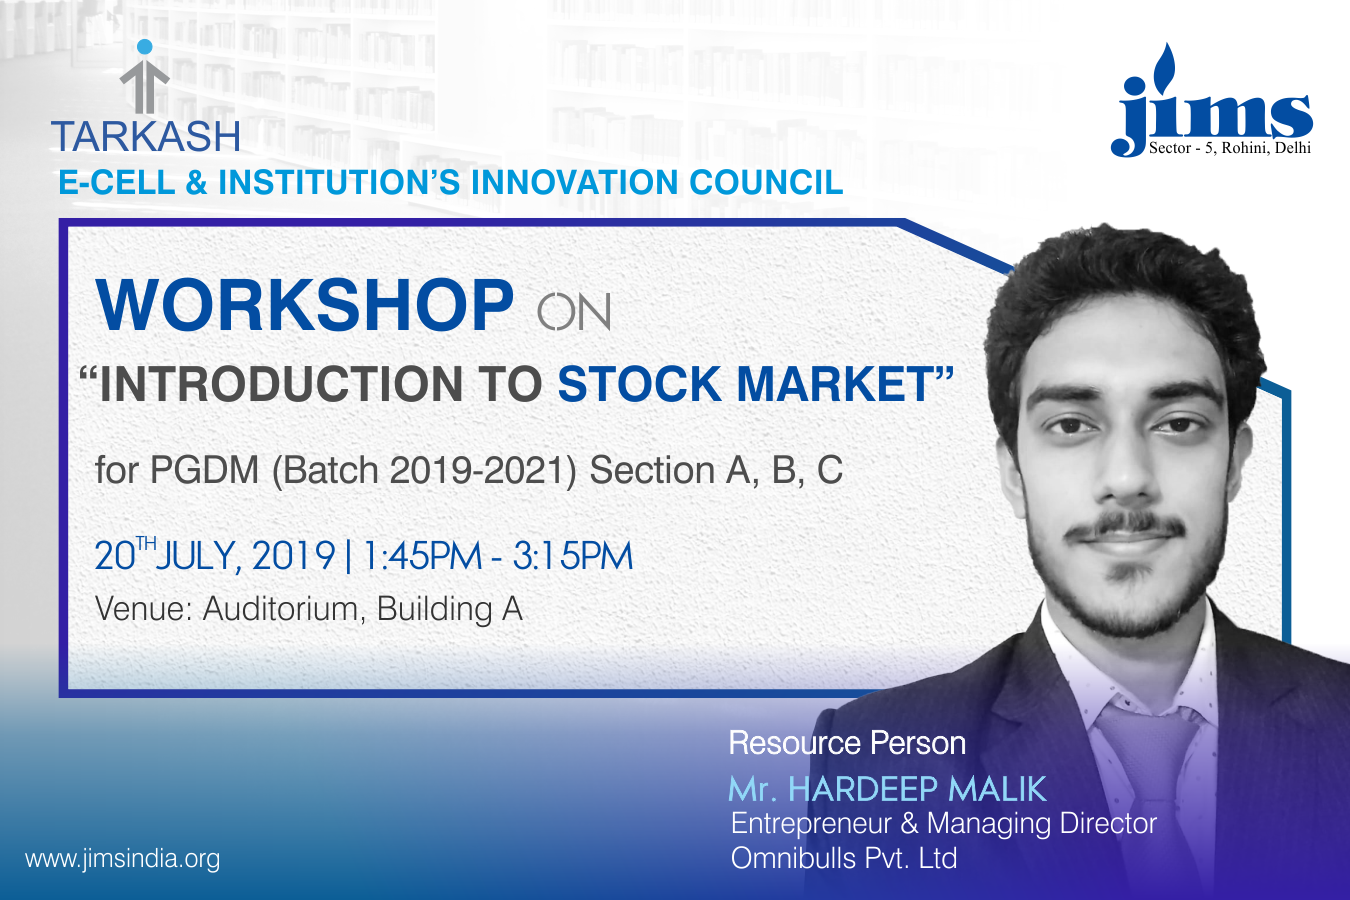 JIMS Rohini E-Cell: Tarkash Organising a Workshop on Introduction to Stock Market for PGDM Batch (2019-2021)